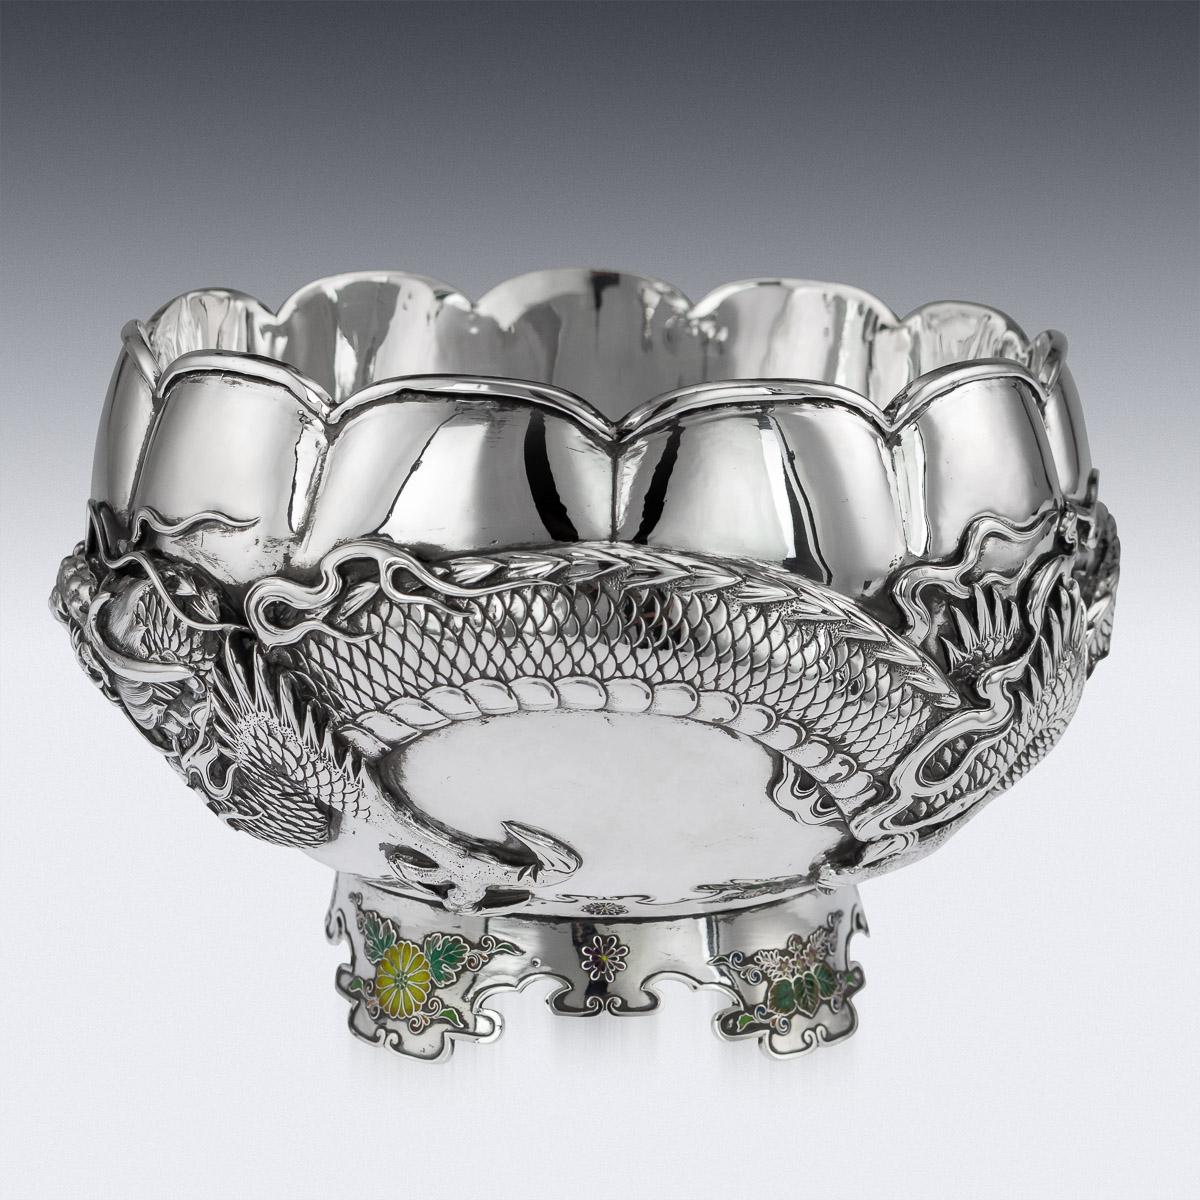 Antique late-19th century Japanese, Meiji period solid silver & enamel dragon bowl, exceptional and magnificent quality, double walled, chased, embossed and applied with a water dragon in very high relief, with flowing whiskers. The shaped foot